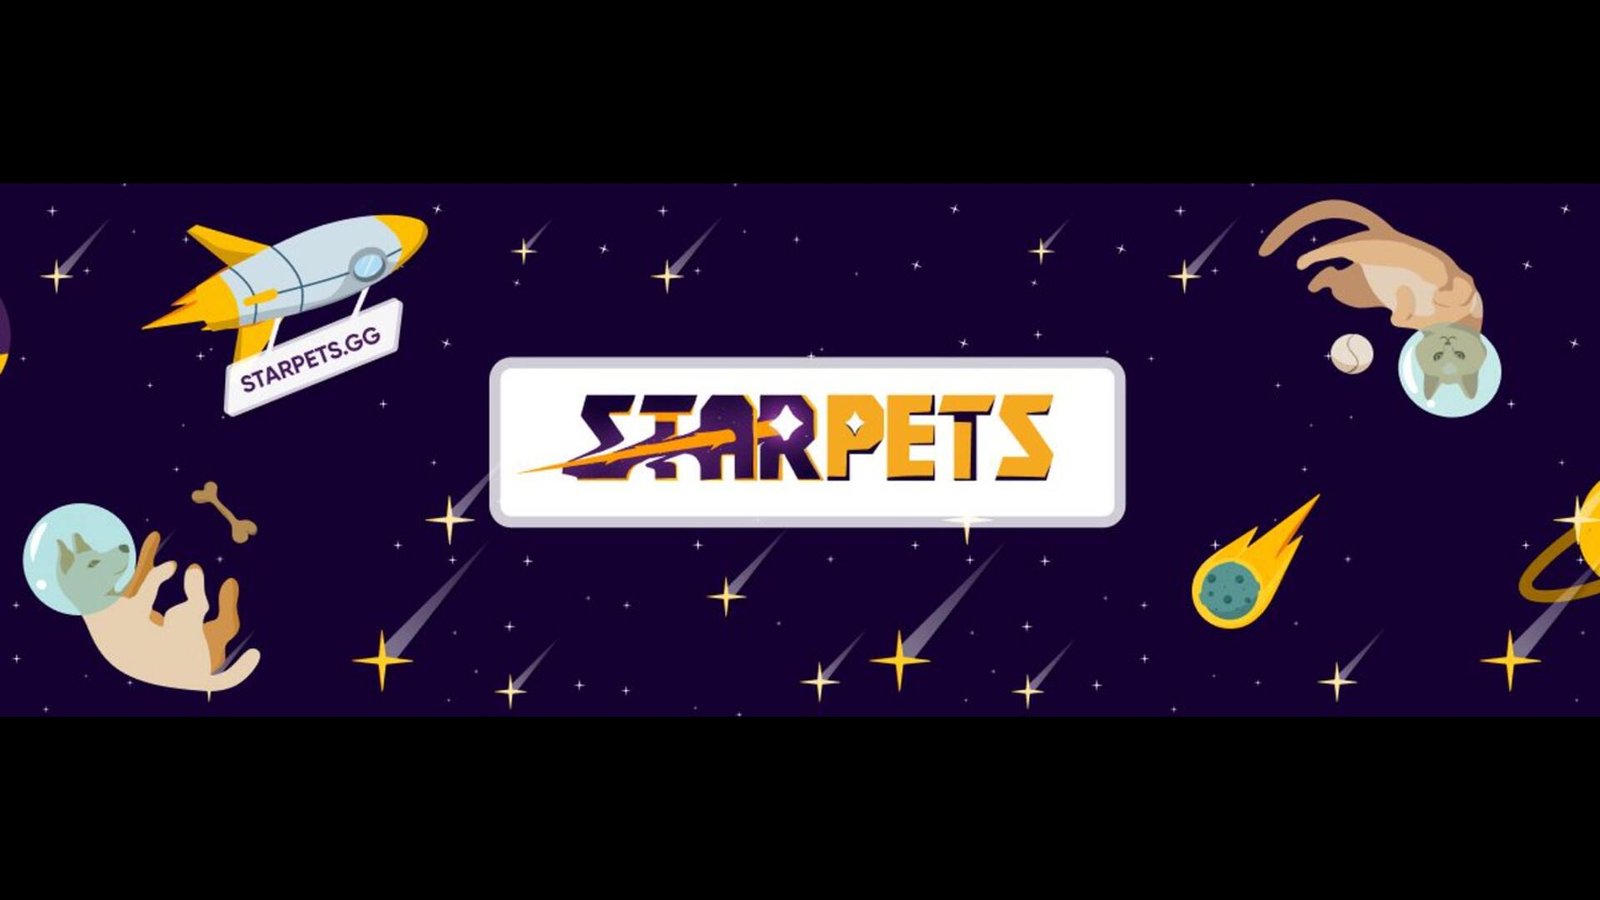 Starpets.gg is the safest way to get pets for such cheap prices. Like